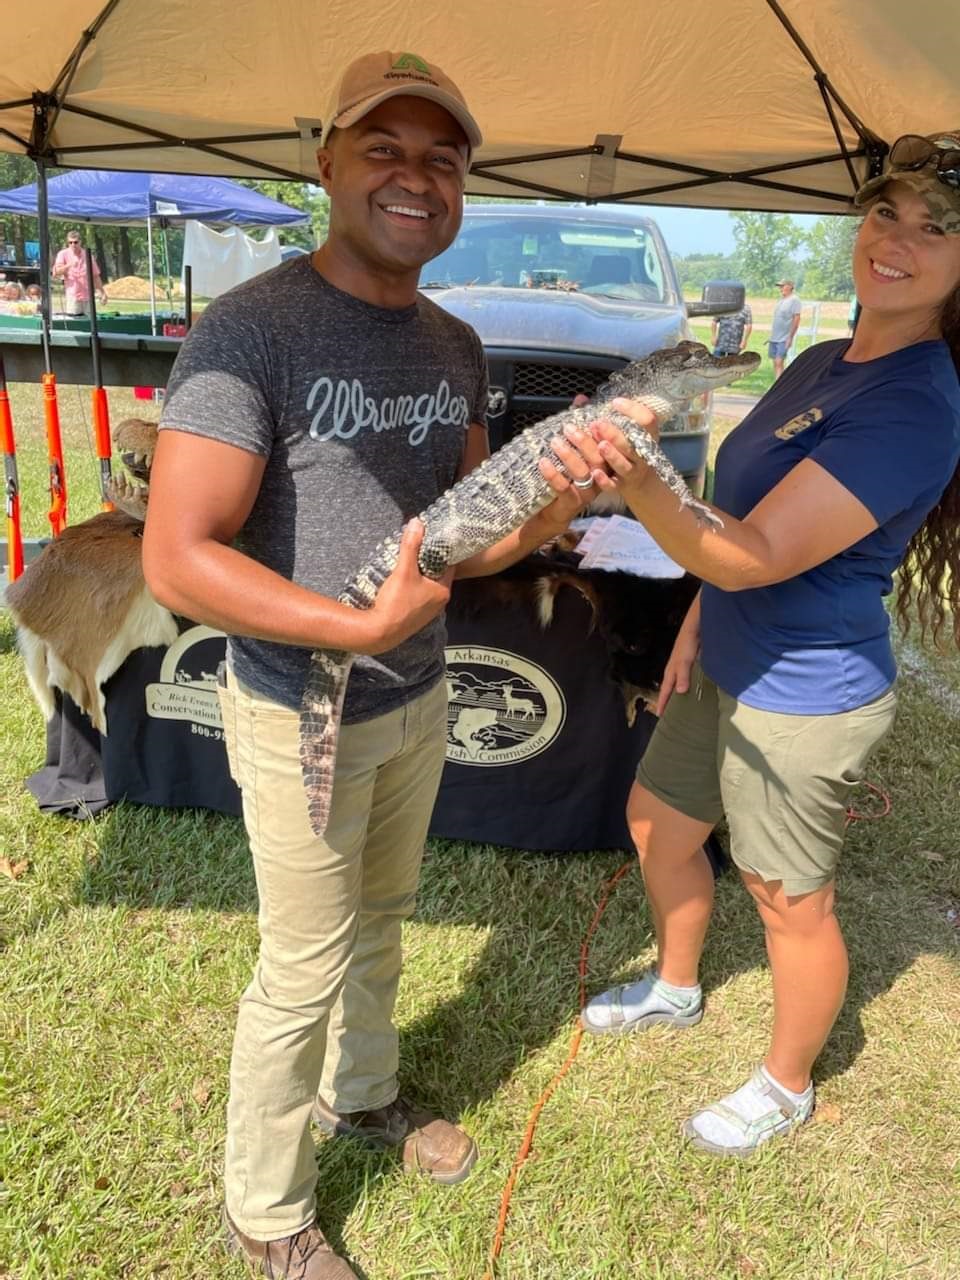 Shaun gets up close and personal with local wildlife while representing Weyerhaeuser at the Dierks Pine Tree Festival. The baby alligator was courtesy of the Arkansas Game and Fish booth!